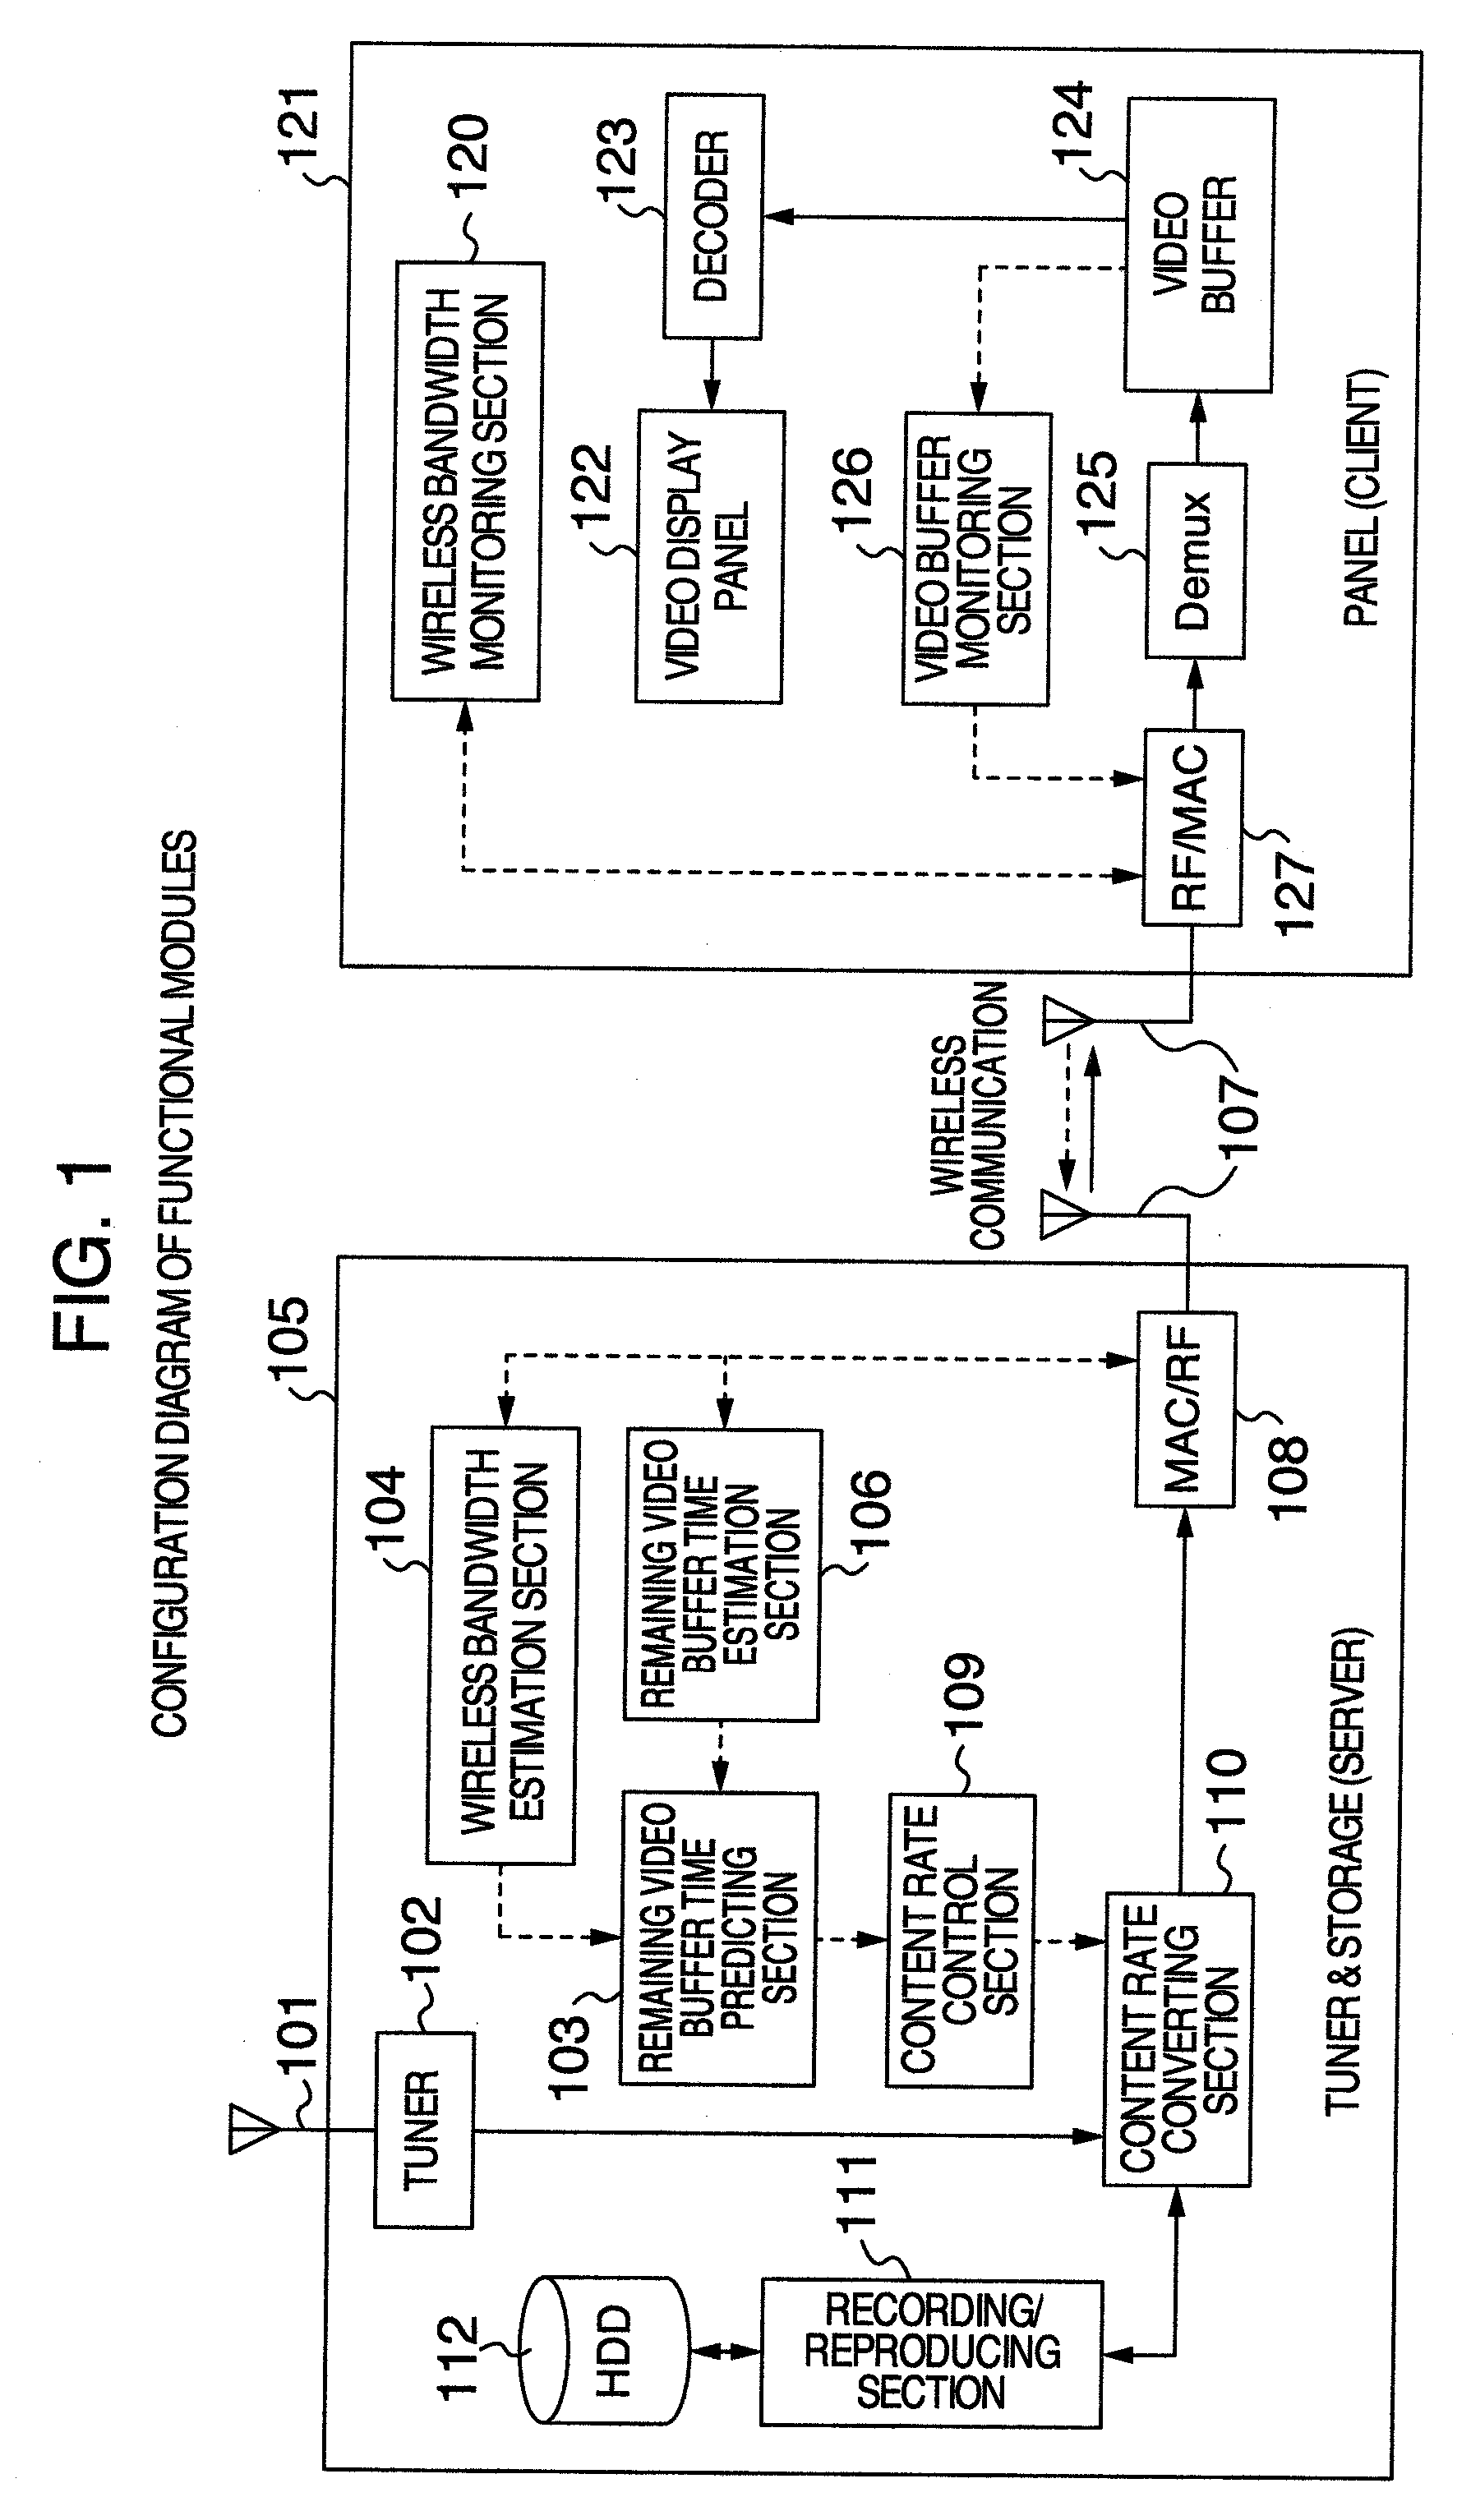 Wireless video distribution system, content bit rate control method, and computer readable recording medium having content bit rate control program stored therein